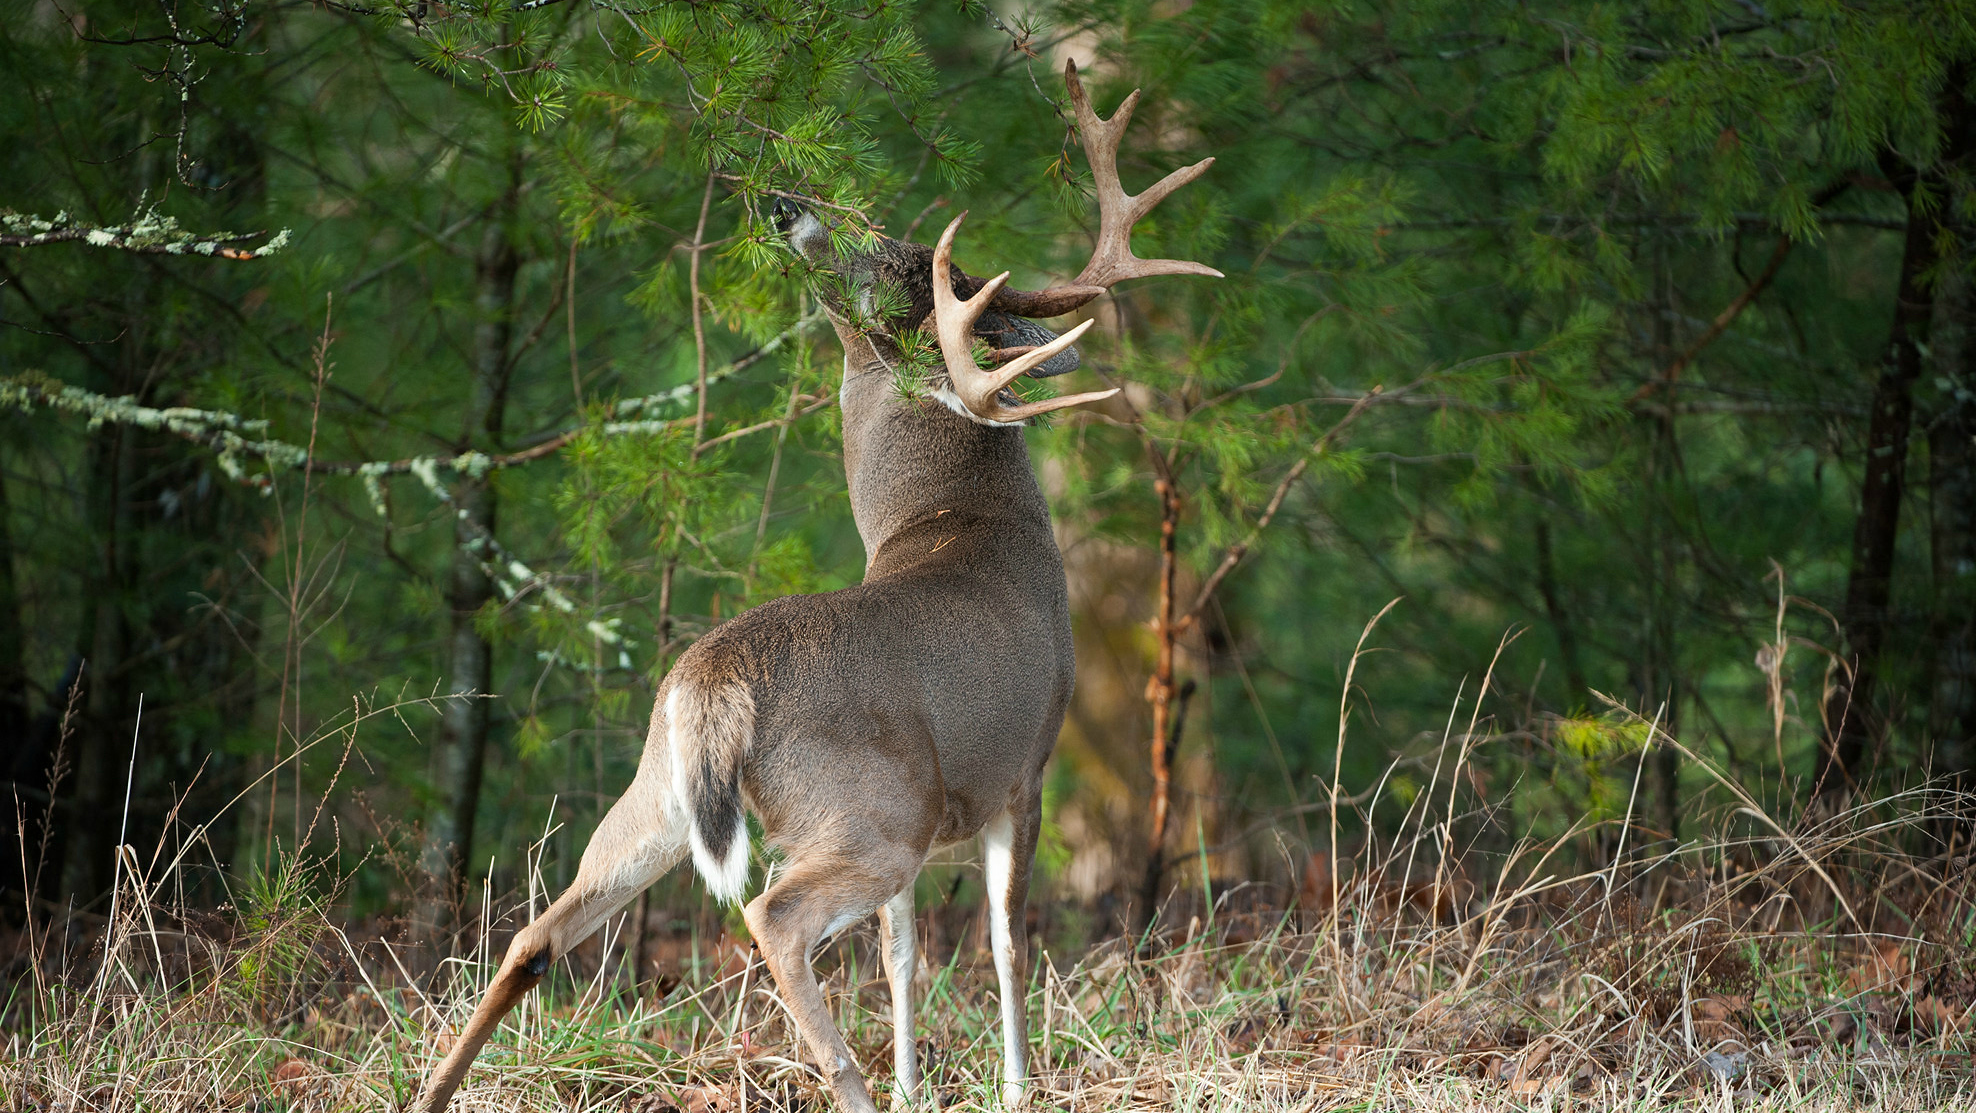 Human or Deer Urine Does It Make a Difference? MeatEater Wired To Hunt hq nude picture